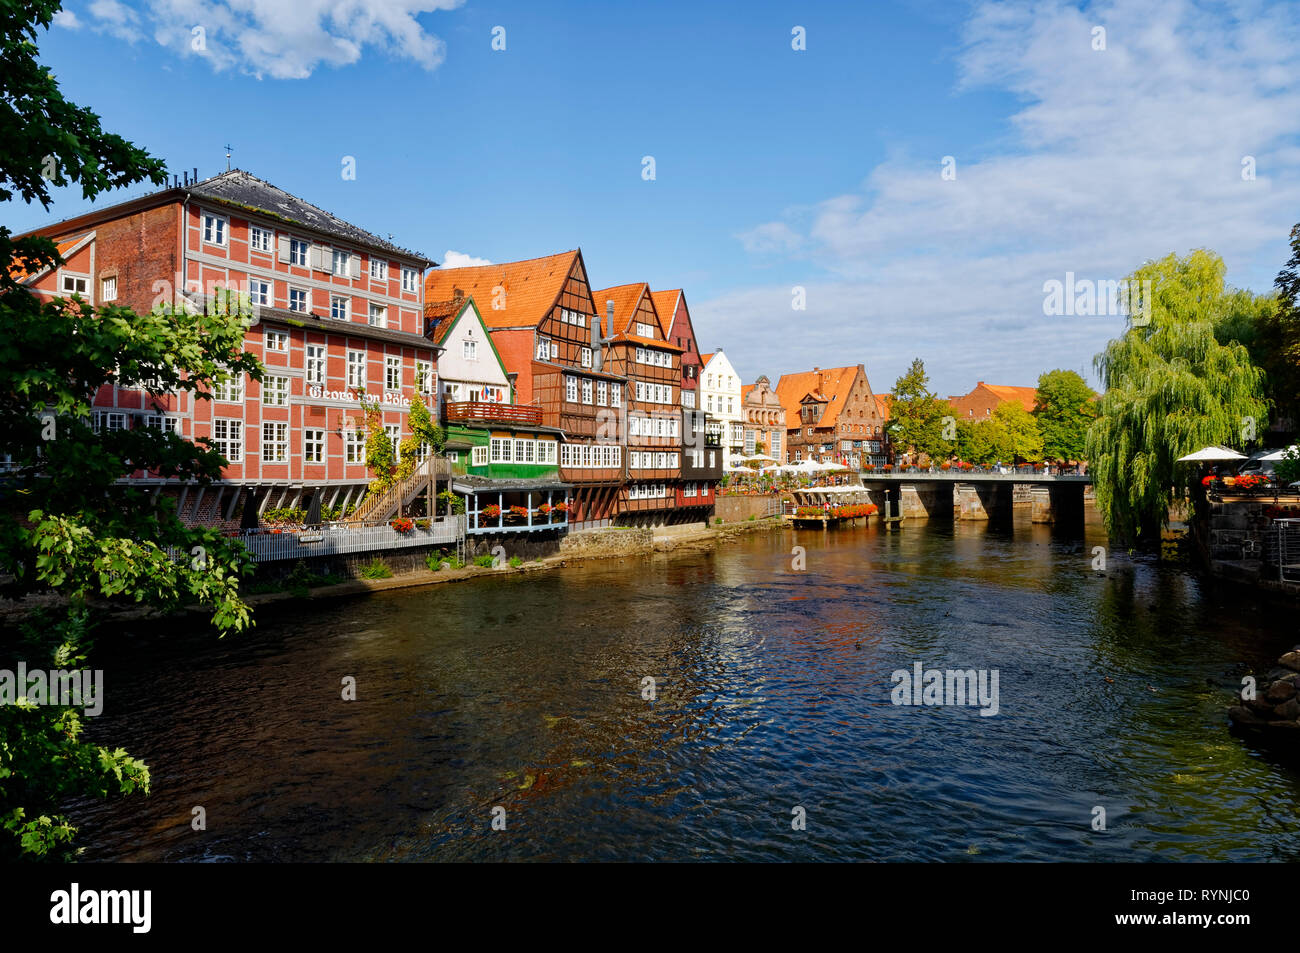 Lüneburg: Houses in old town along the river Ilmenau (Waterside Quarter), Lower Saxony, Germany Stock Photo